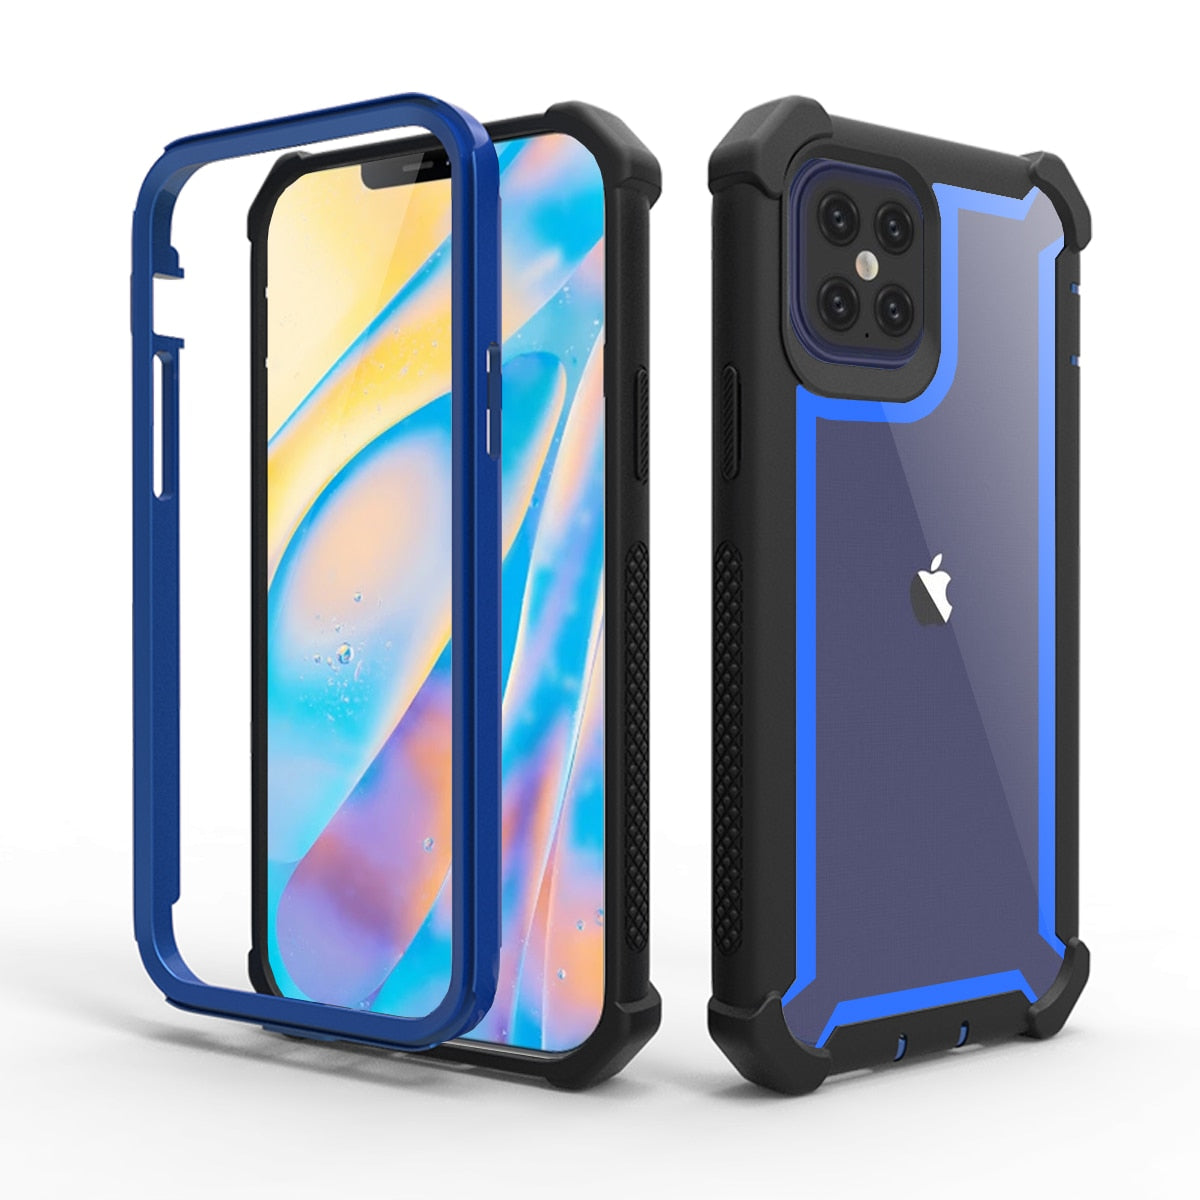 Grey Color Case - Shockproof Bumper Transparent TPU Phone Case For iPhone 12 Mini 12 11 Pro Max X XR XS Max SE 2020 6 6S 8 Plus Back Cover - 380230 Find Epic Store